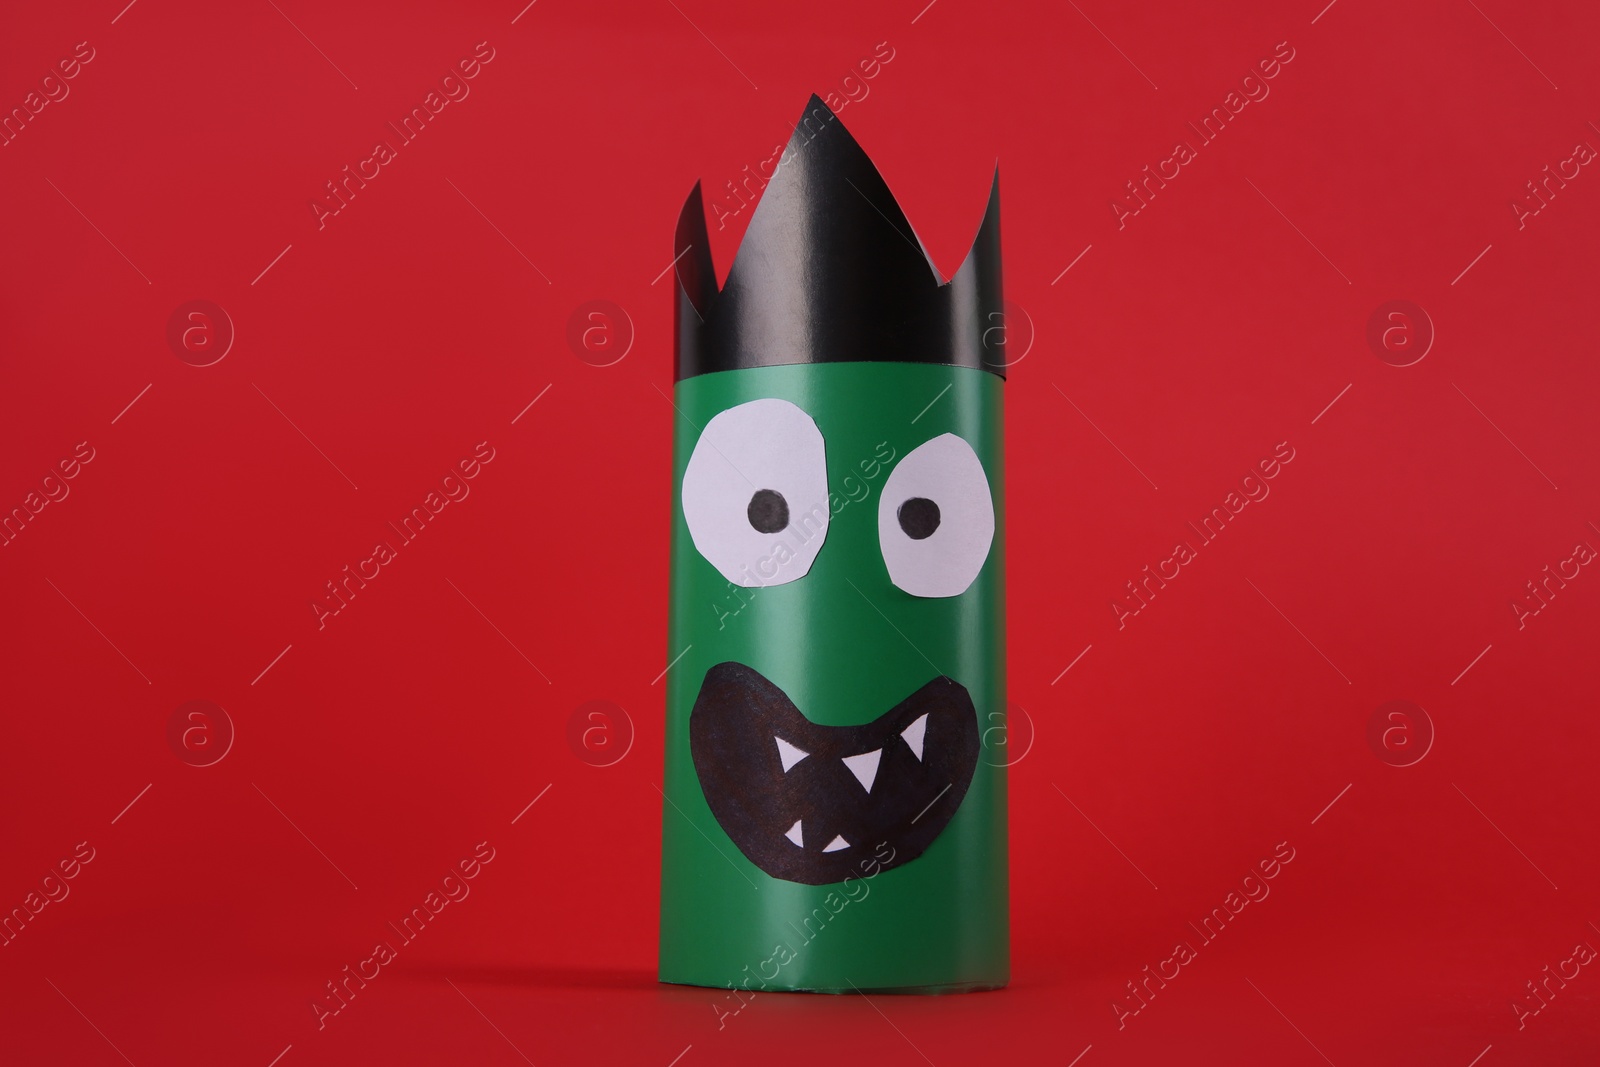 Photo of Funny green monster on red background. Halloween decoration